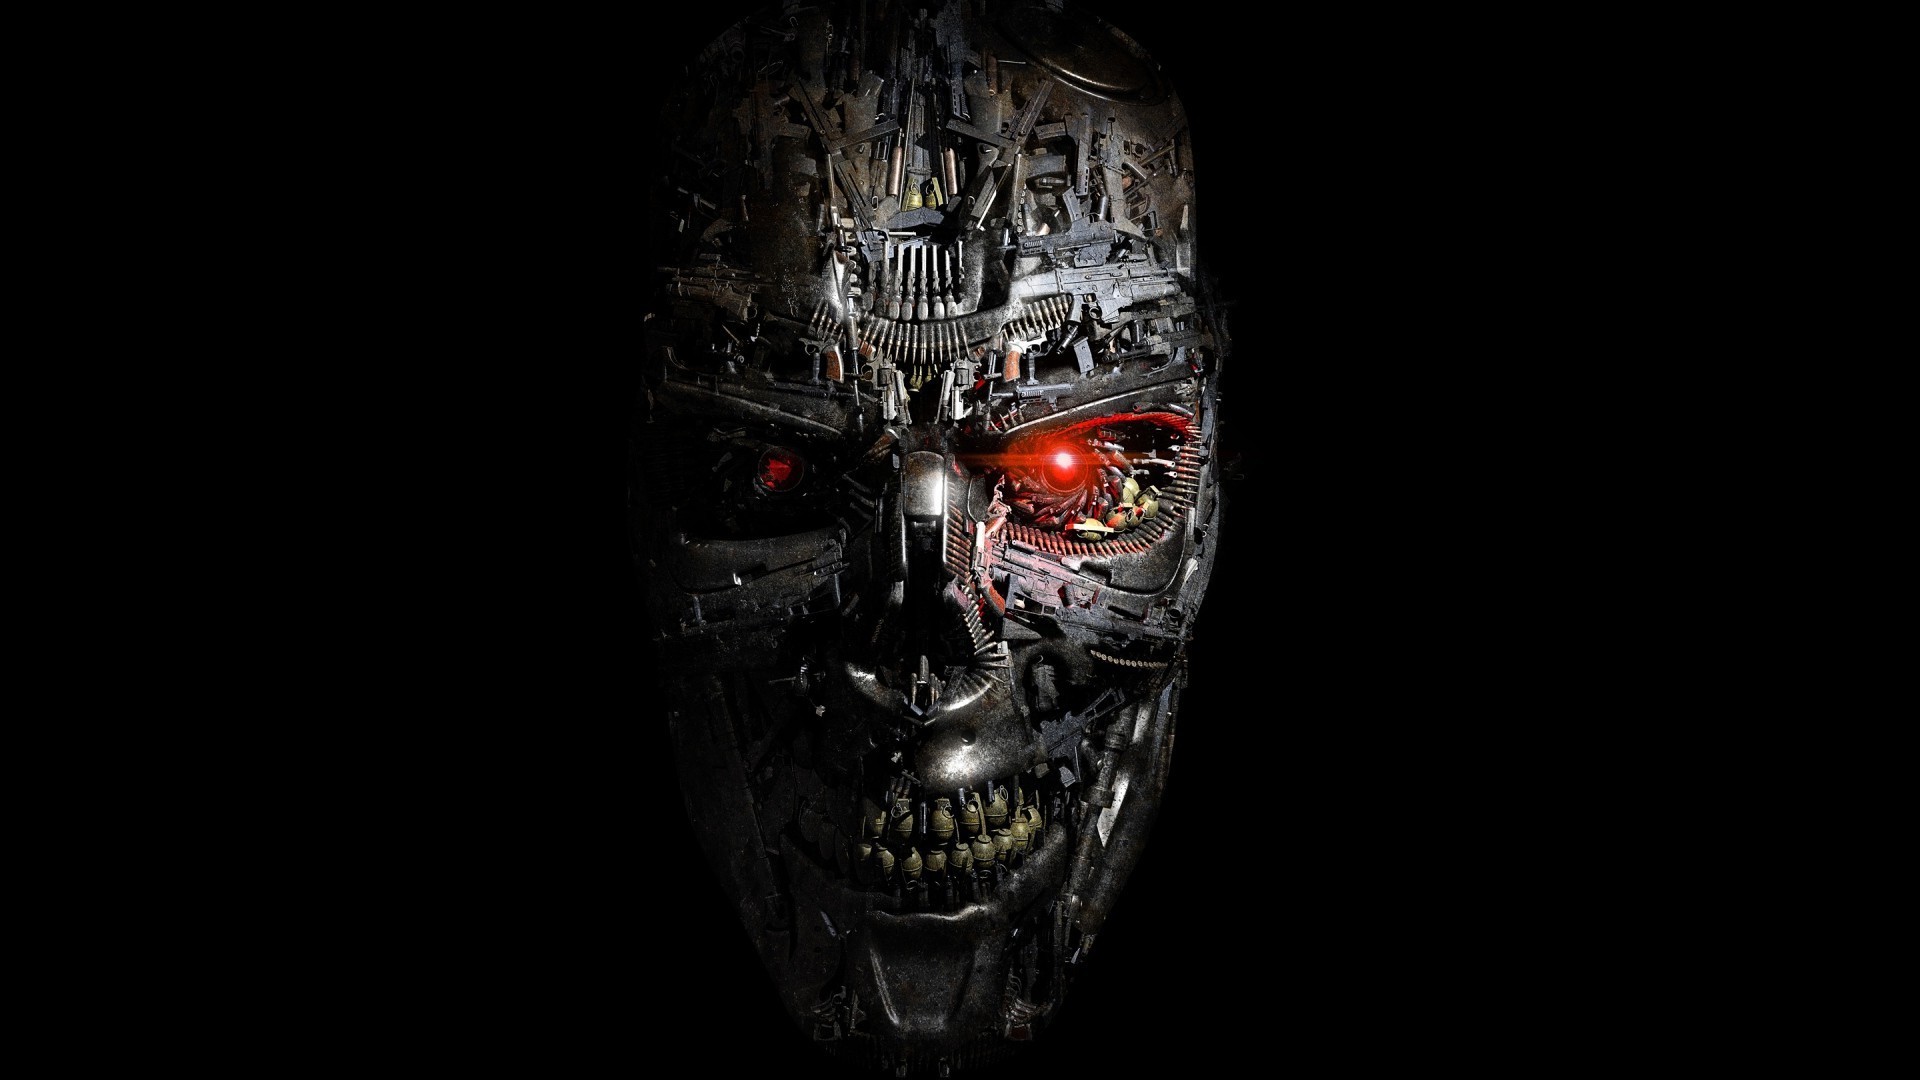 1920x1080 Terminator Wallpaper - Wallpapers Browse 90 entries in Skull Wallpapers   group ...